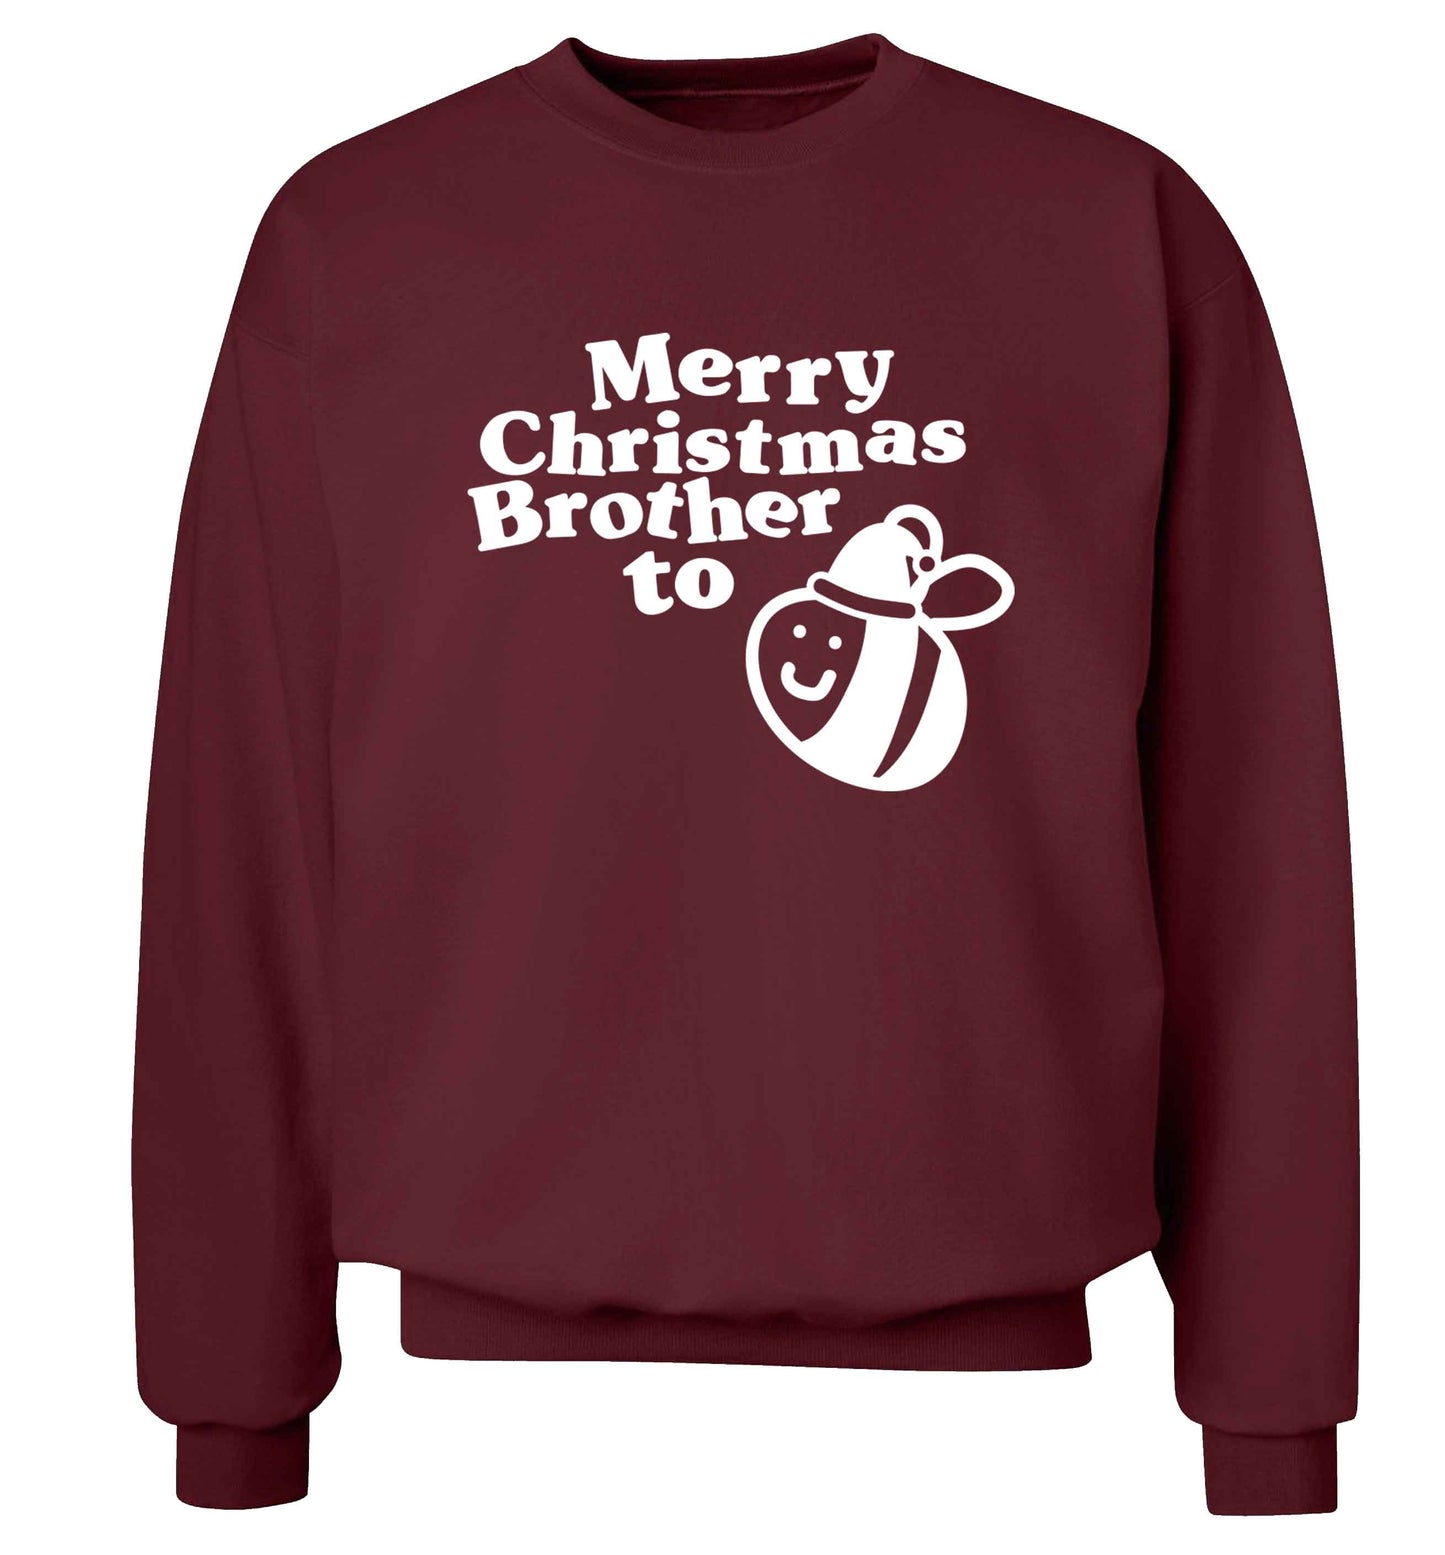 Merry Christmas brother to be Adult's unisex maroon Sweater 2XL